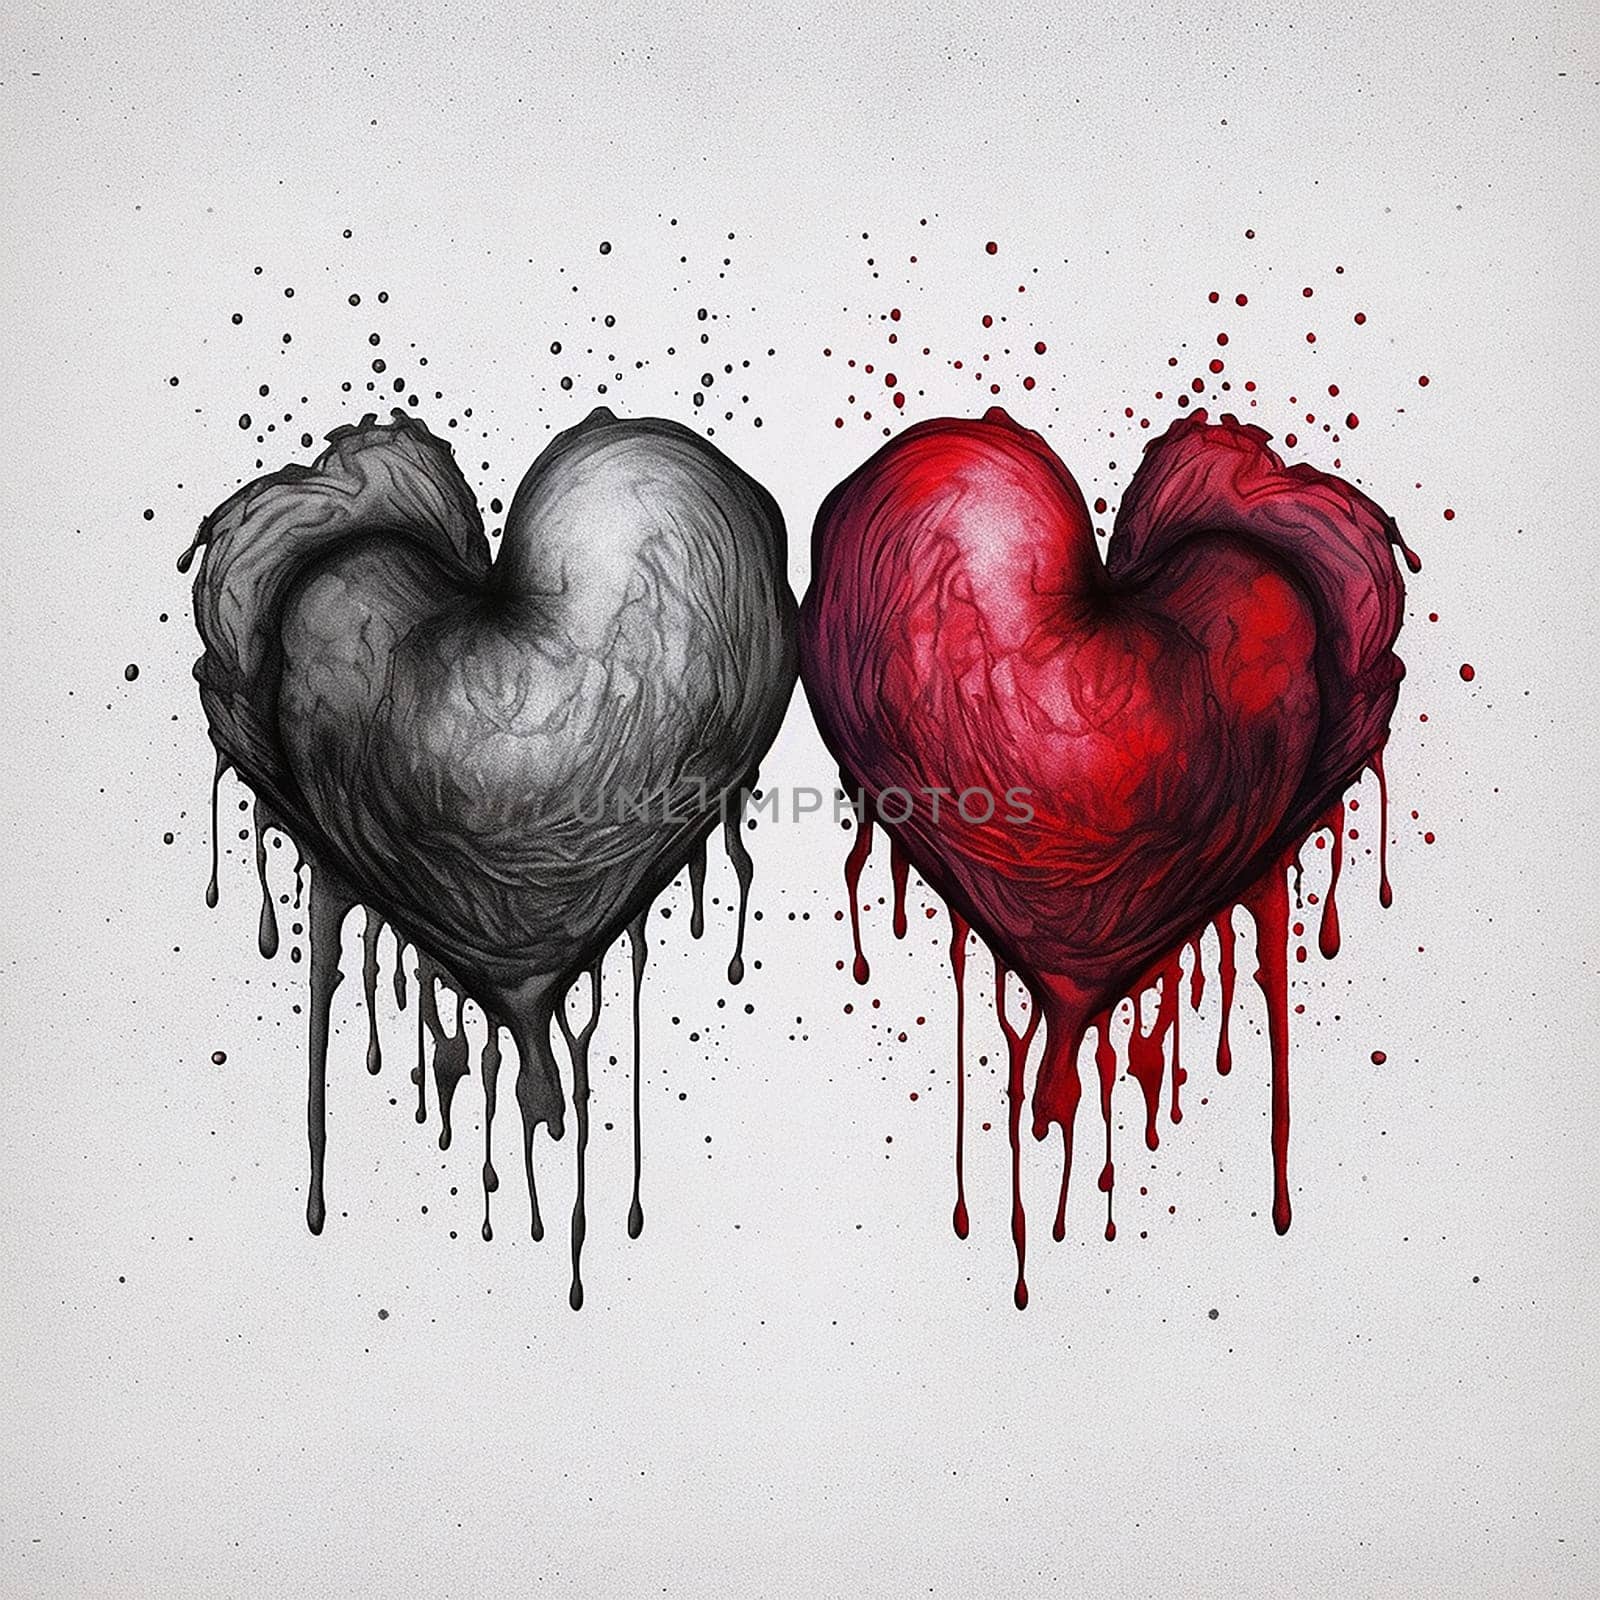 Two heart shapes, one black and one red, with a dripping paint effect by Hype2art